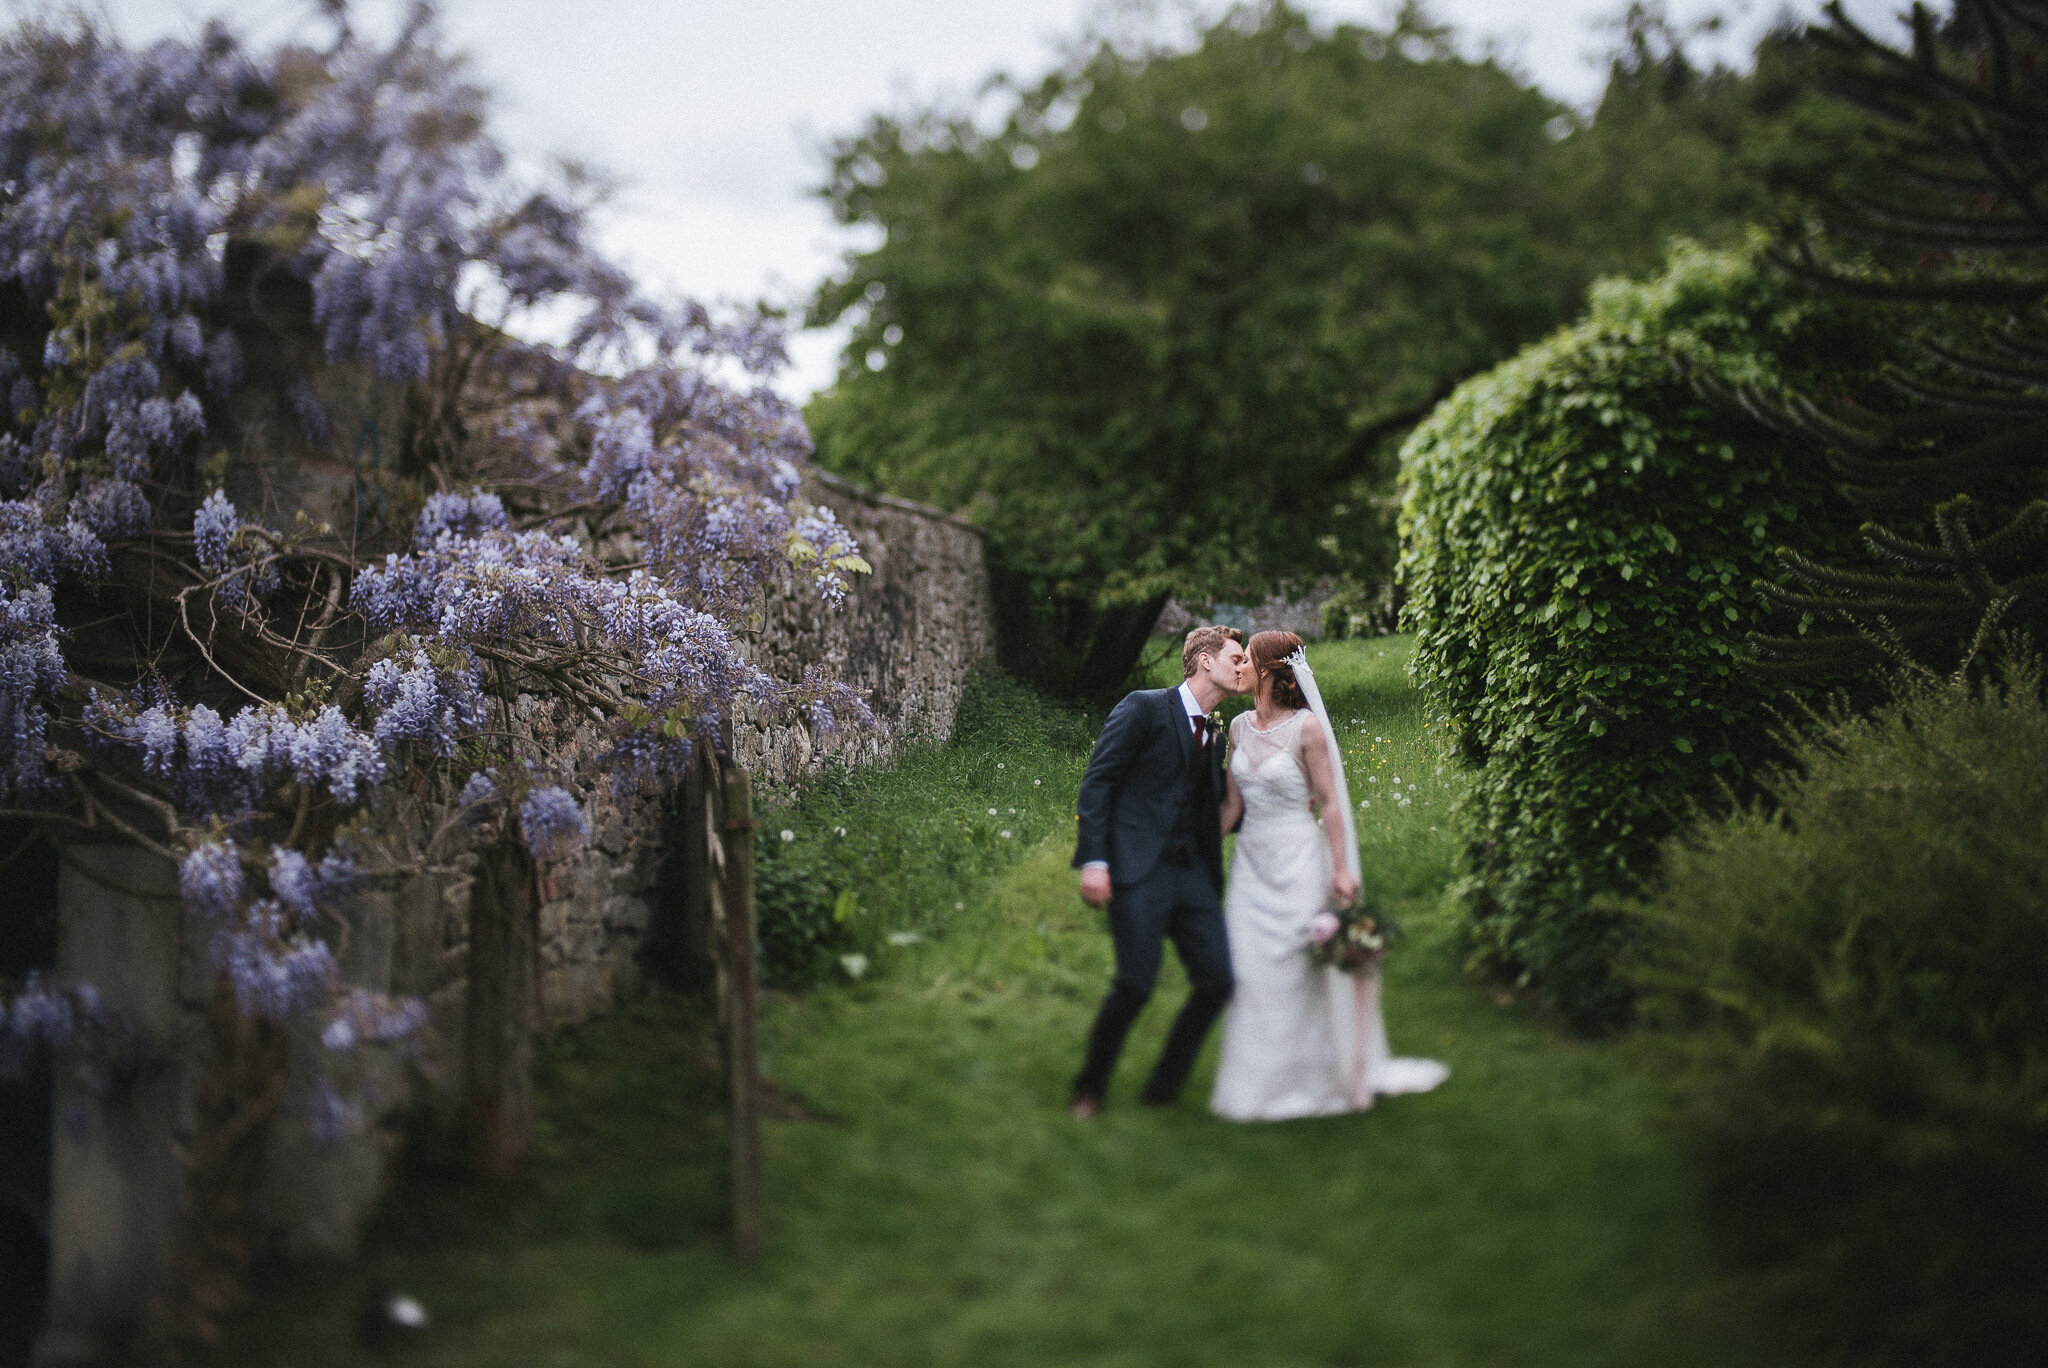 The month of May presents beautiful tones of green and Wisteria pinks Trevor Hall Wedding Photographer